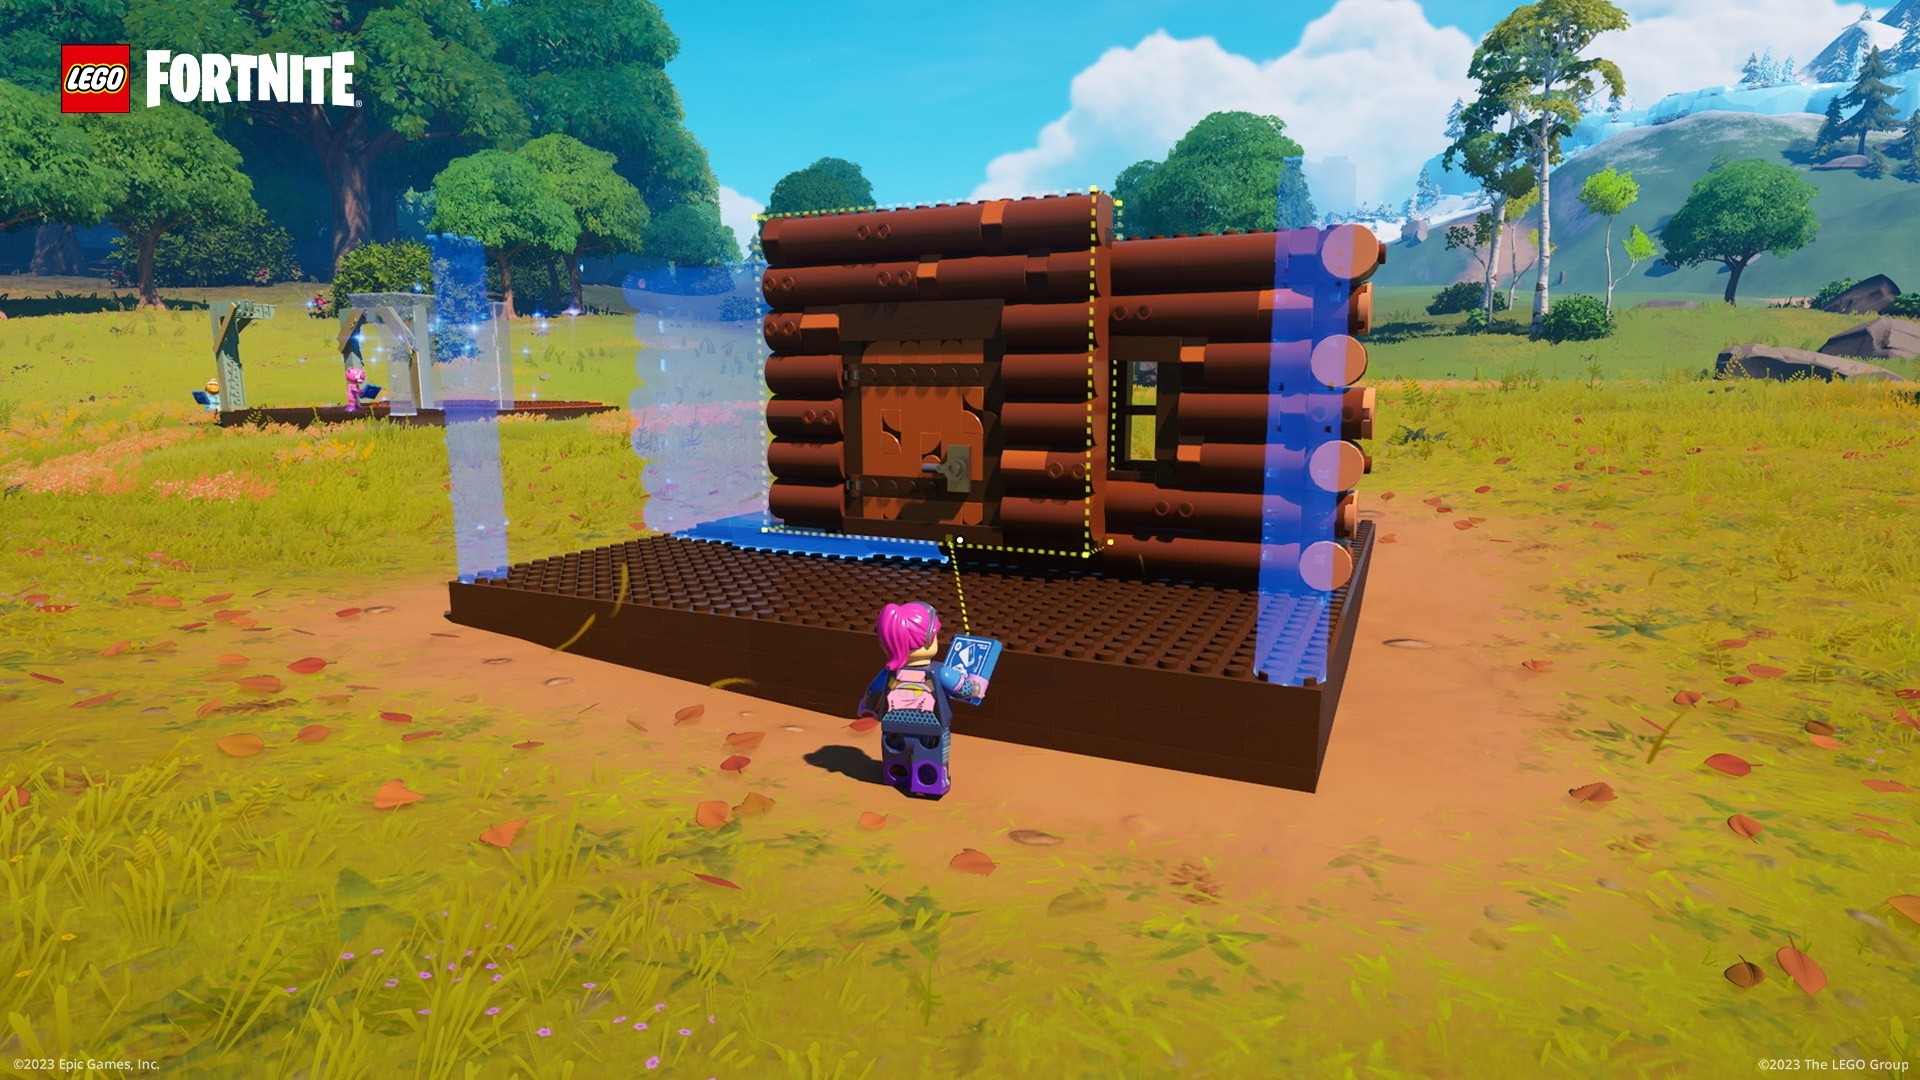 LEGO Fortnite trailer reveals an epic crafting adventure is on the way -  Meristation